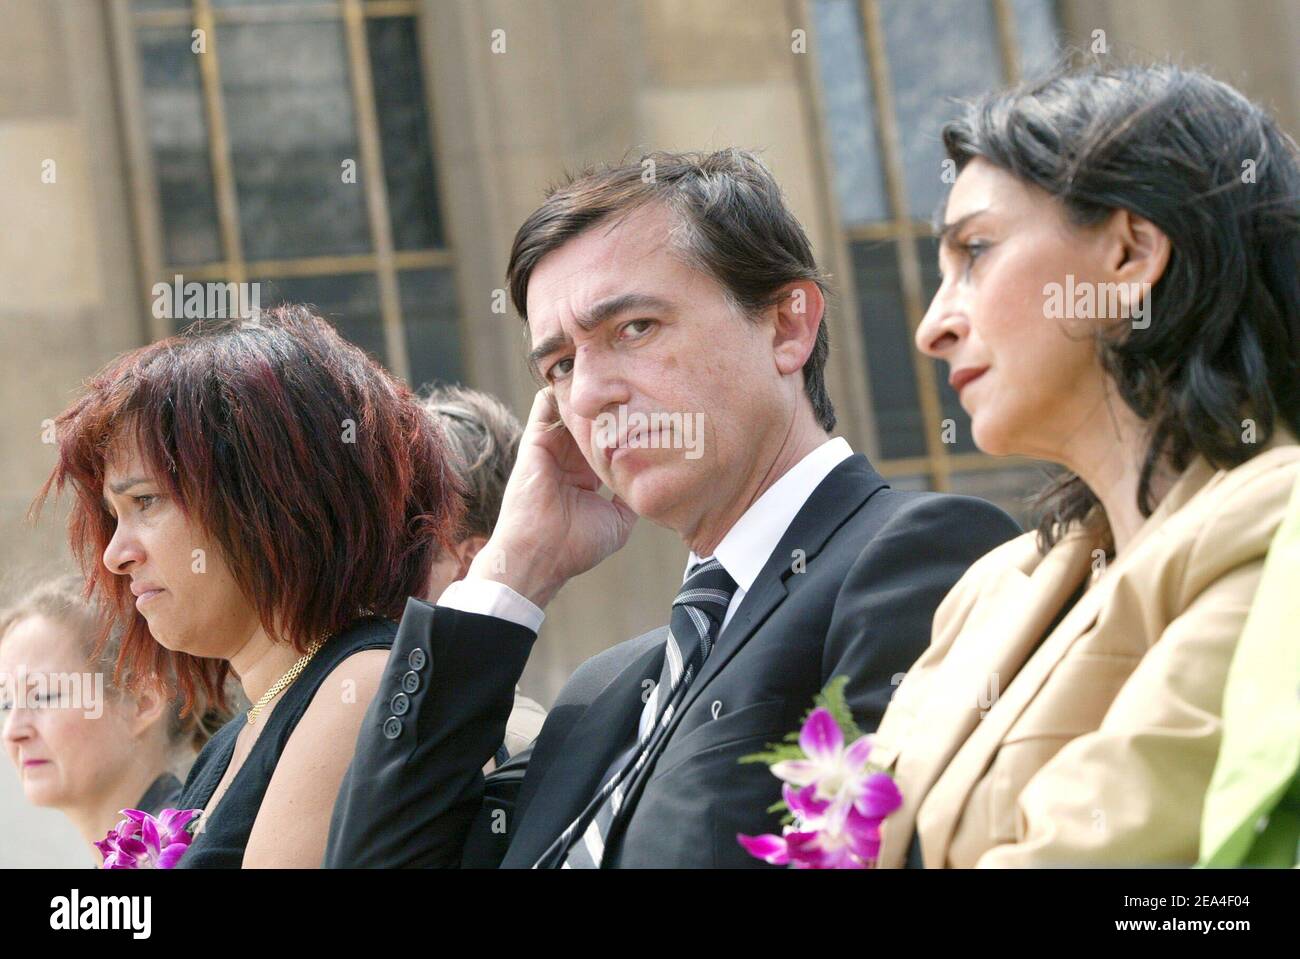 French foreign affairs minister Philippe Douste-Blazy attend a ceremony for the Tsunami victims held on Place du Trocadero in Paris, France on June 26, 2005. Photo by Mehdi Taamallah/ABACA.. Stock Photo